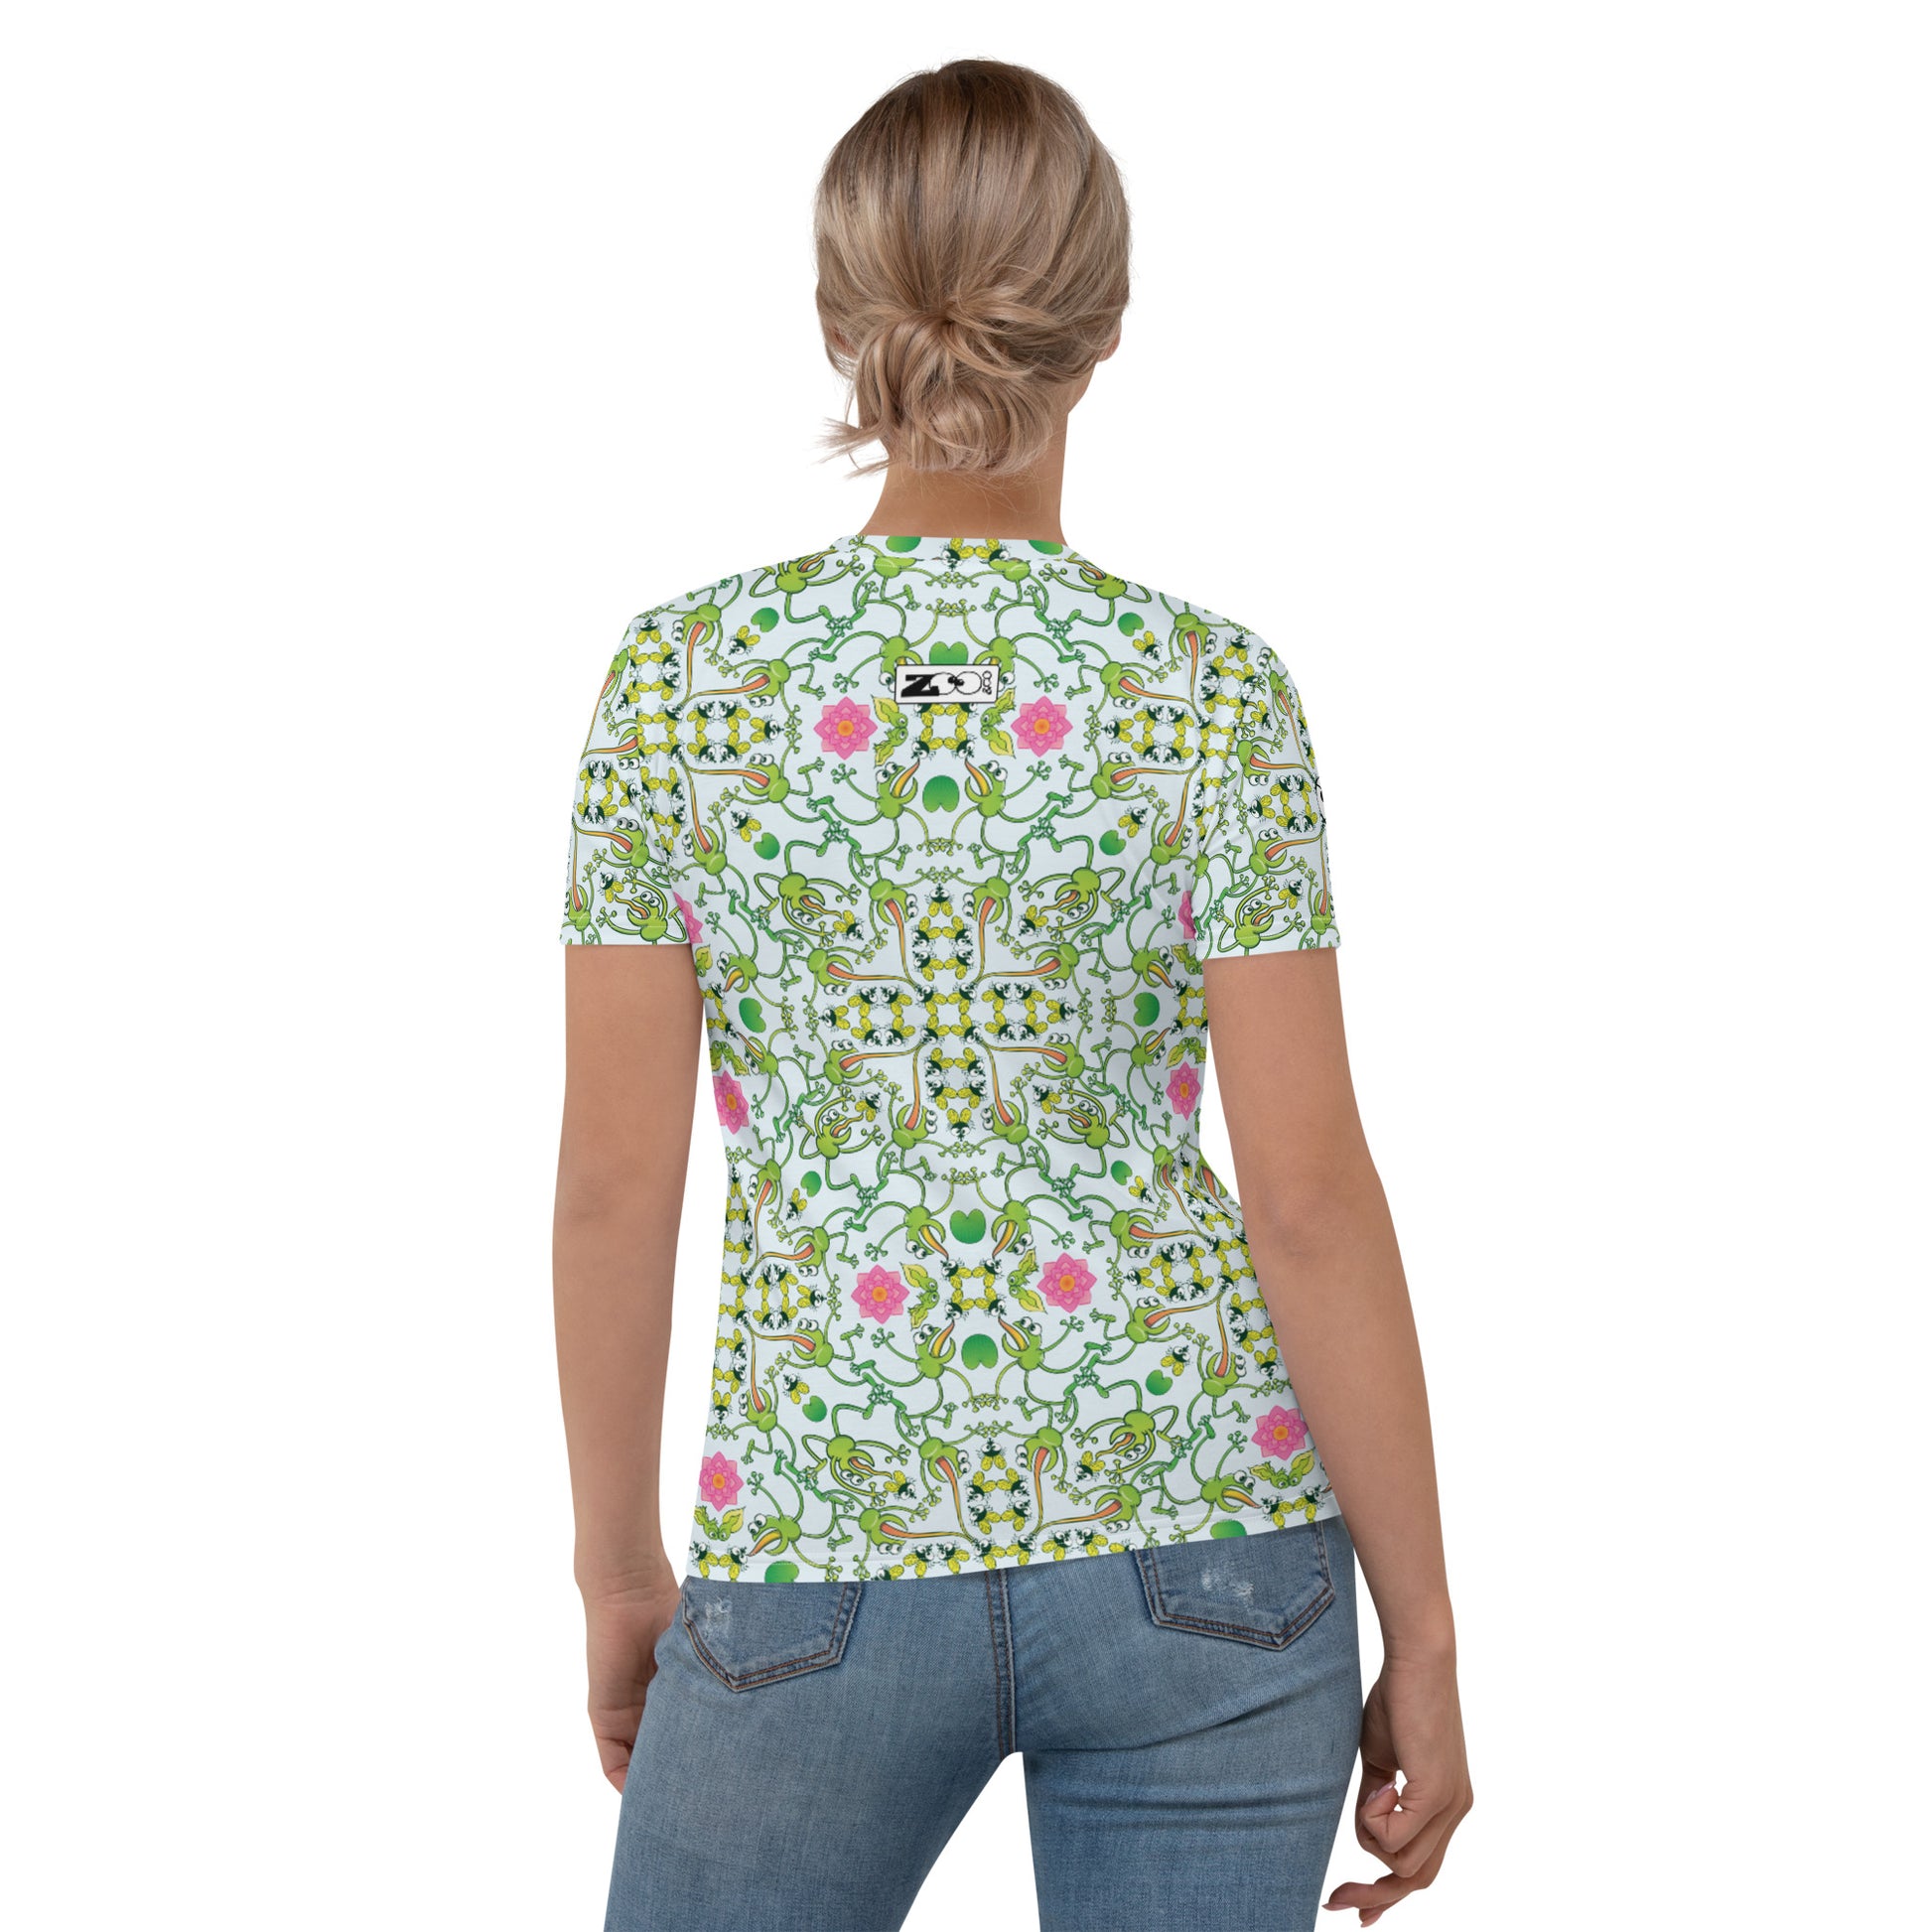 Funny frogs hunting flies Women's All-over print T-shirt. Back view